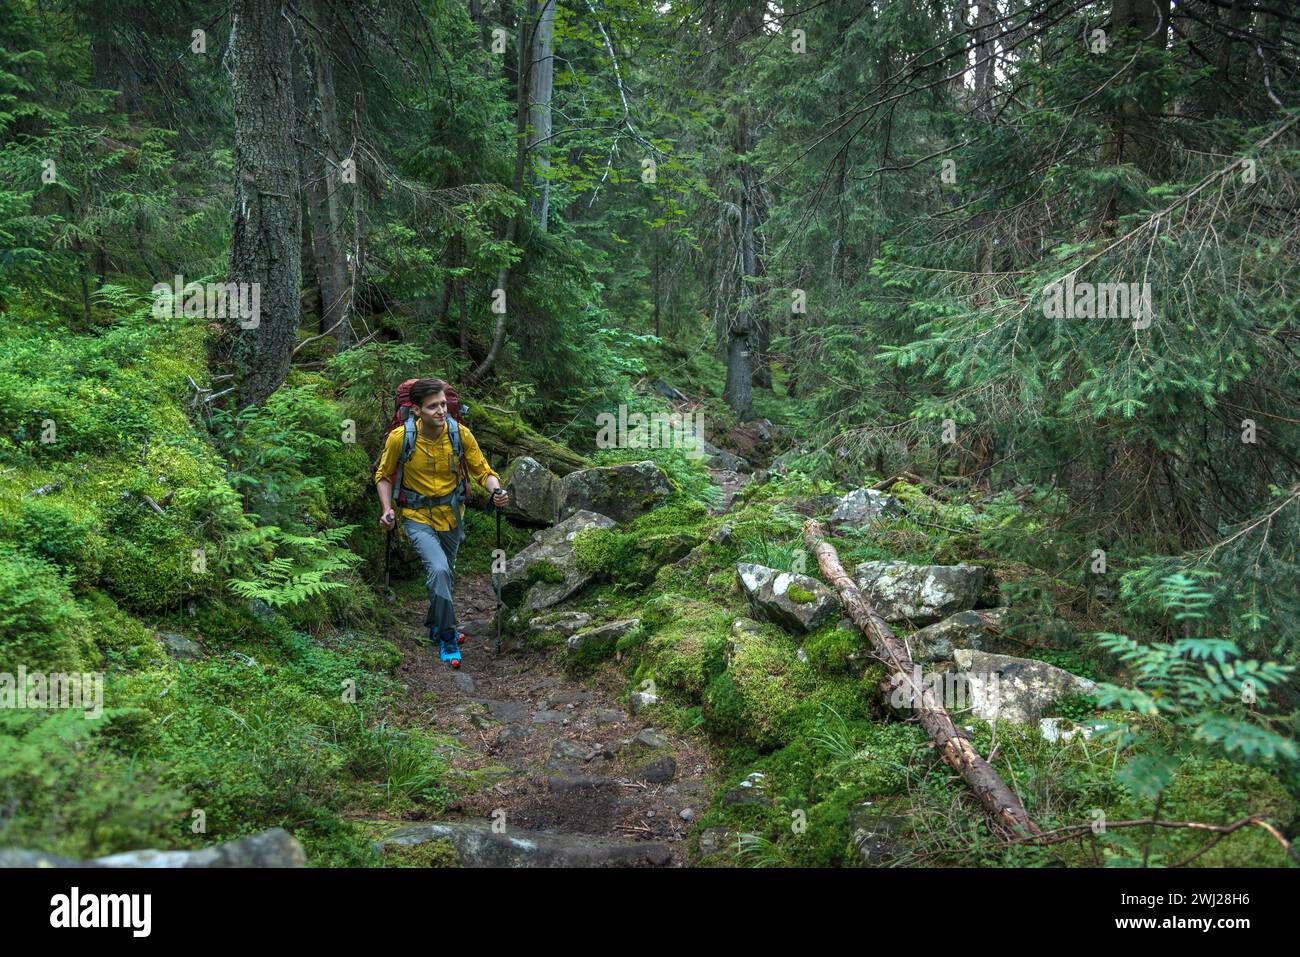 Smiling Man in Mountain Forest Enjoying Hiking During the Weekend Stock Photo